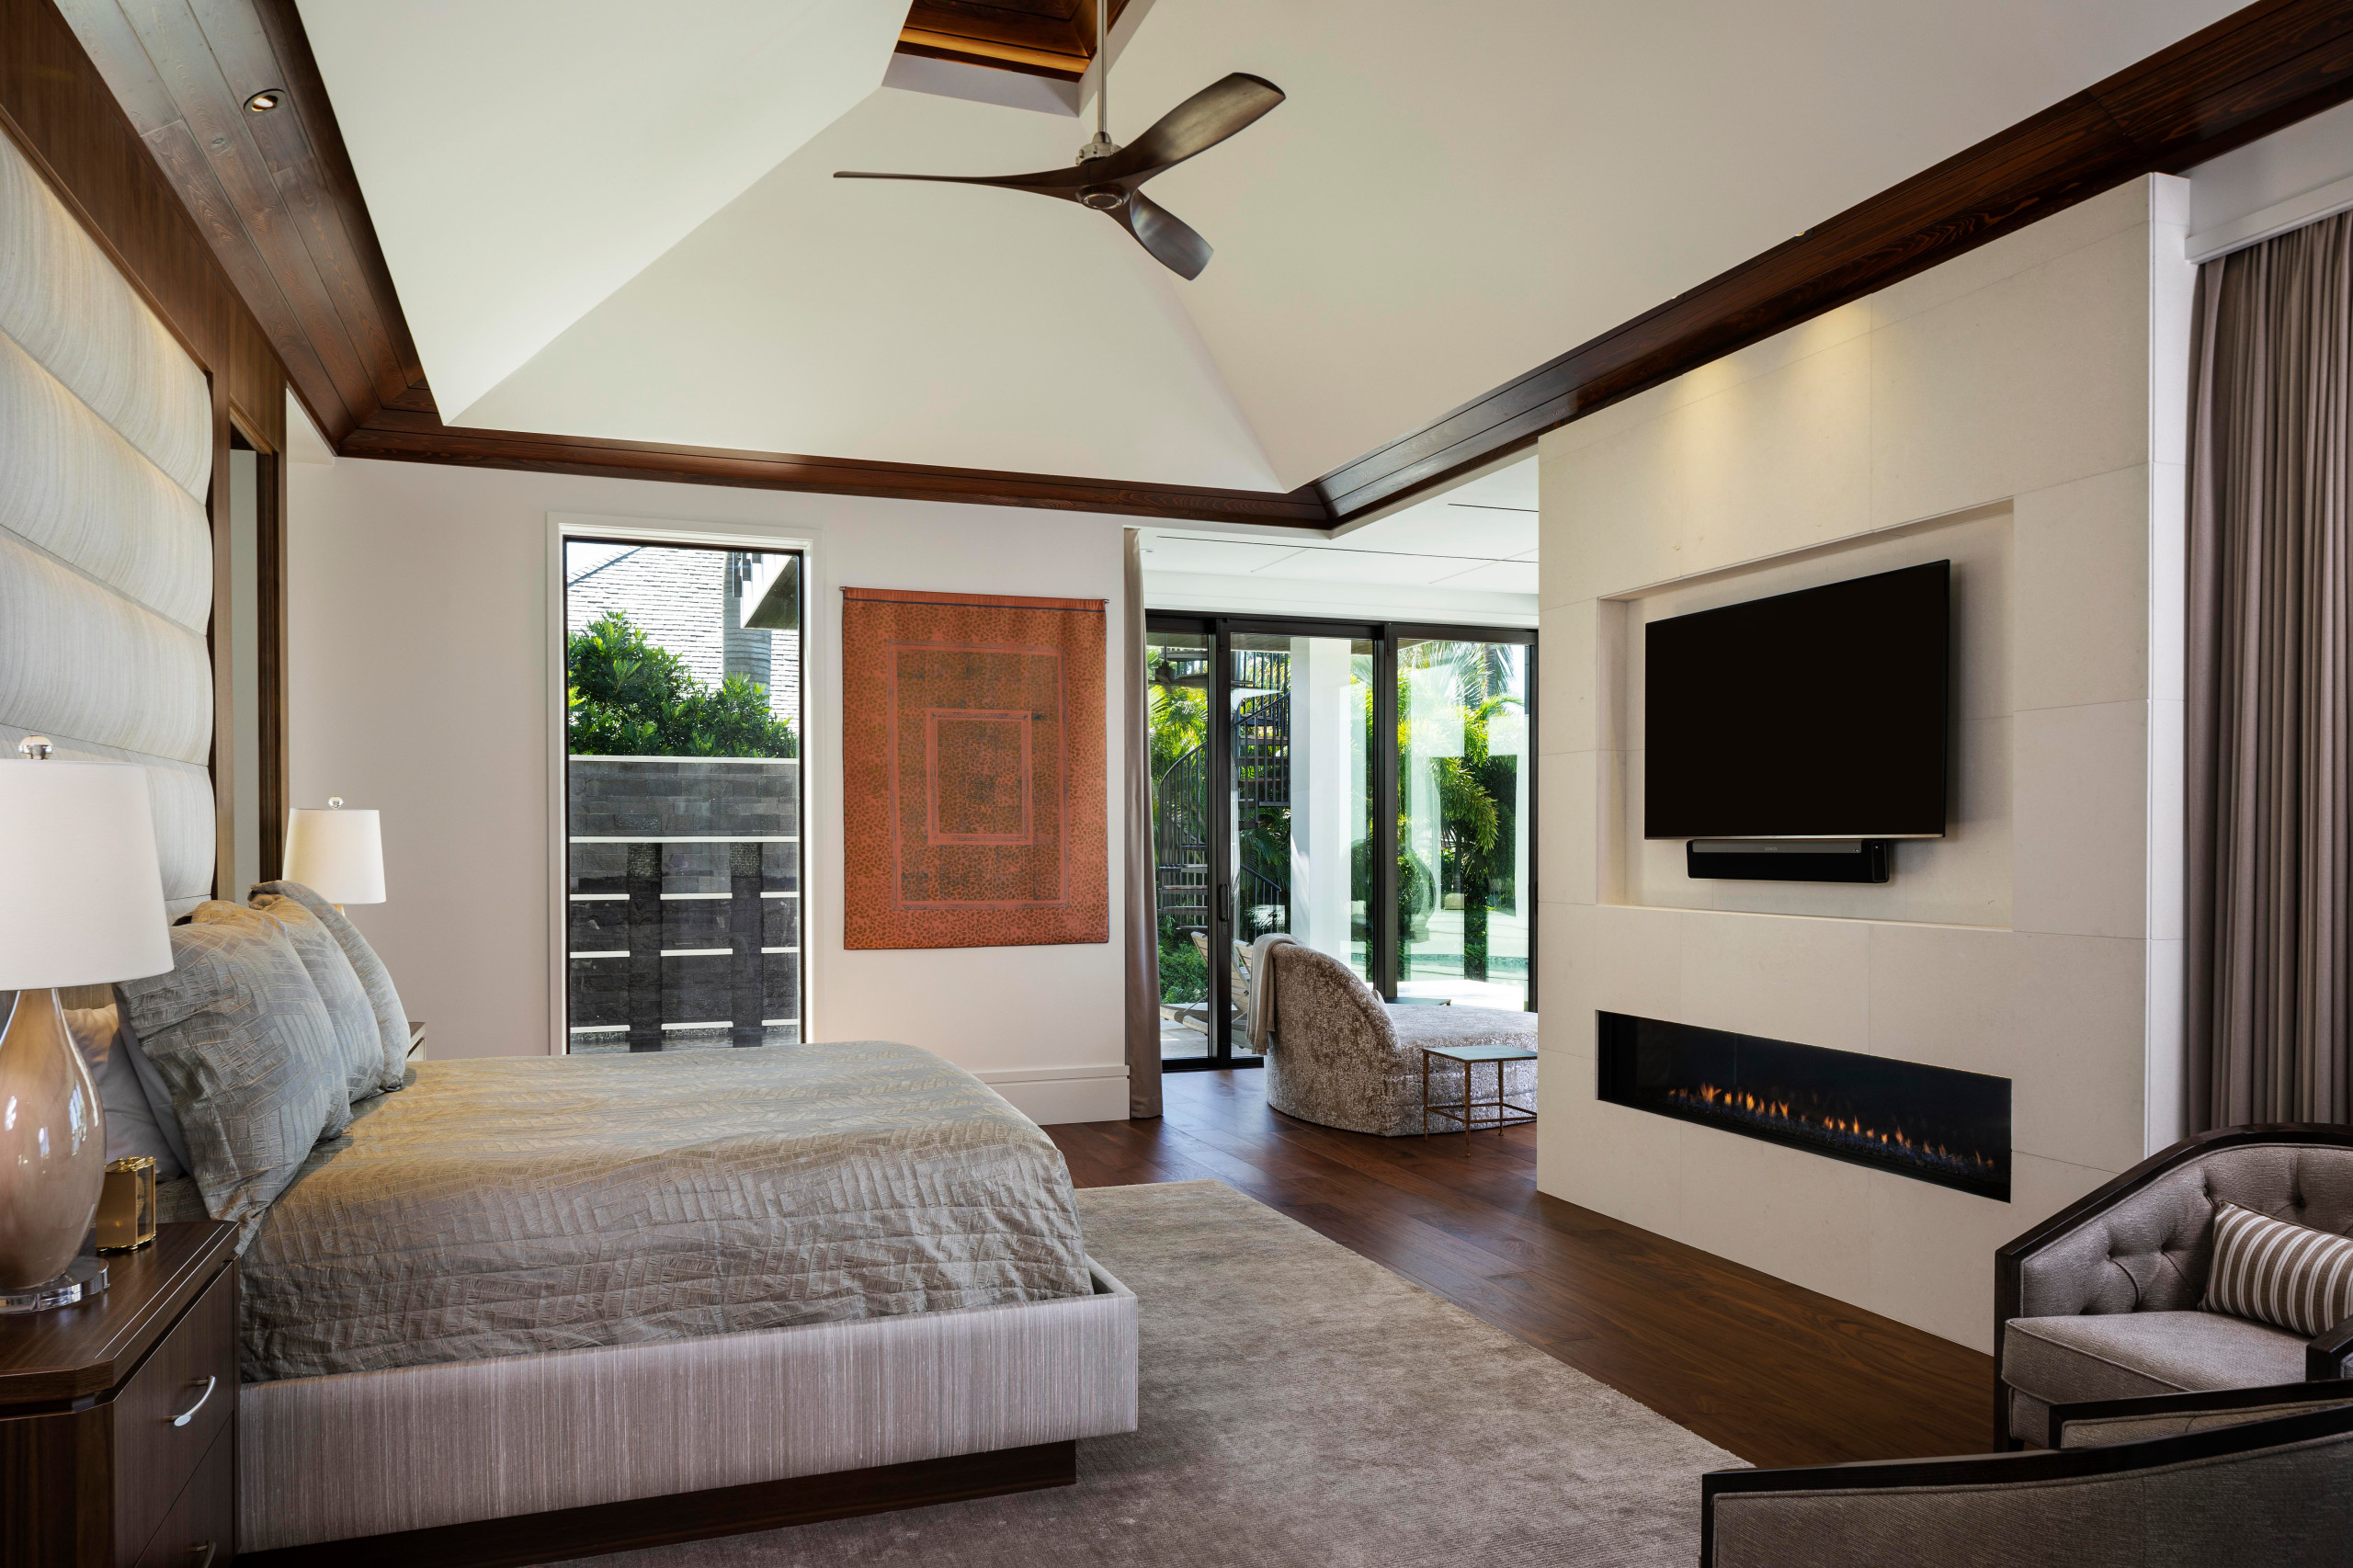 Must See Master Bedroom Pictures Ideas Before You Renovate 2020 Houzz,Michelle Obama Birthday Card